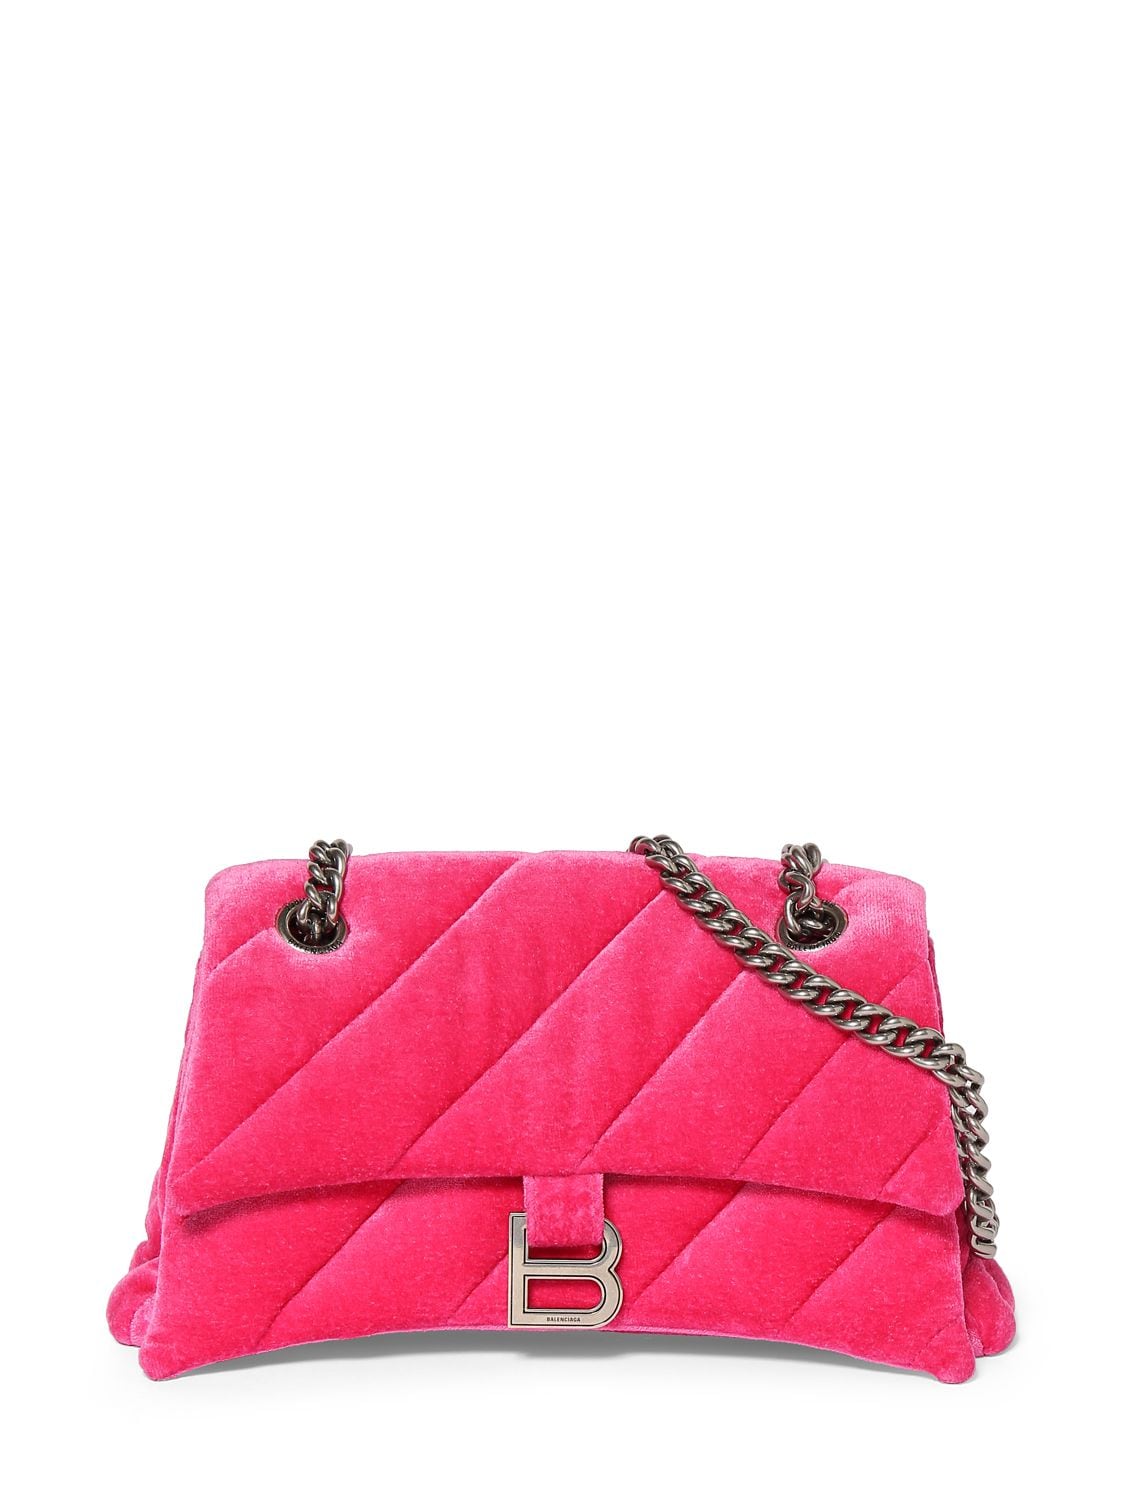 Balenciaga Small Crush Quilted Viscose Blend Bag In Bright Pink